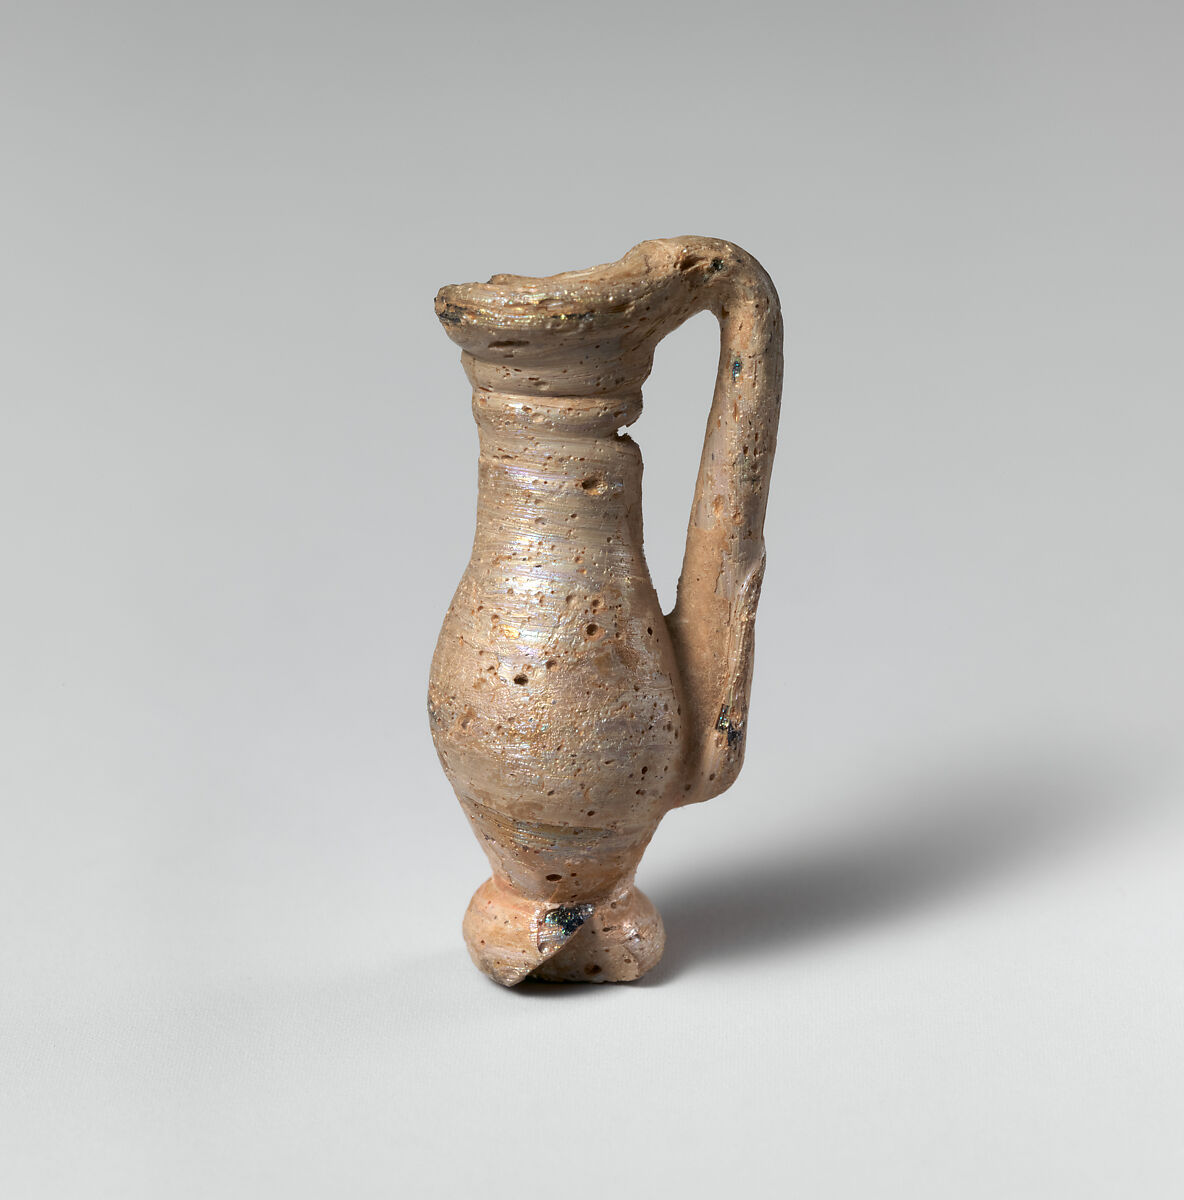 Glass pendant in the form of a miniature jug, Glass, Roman 